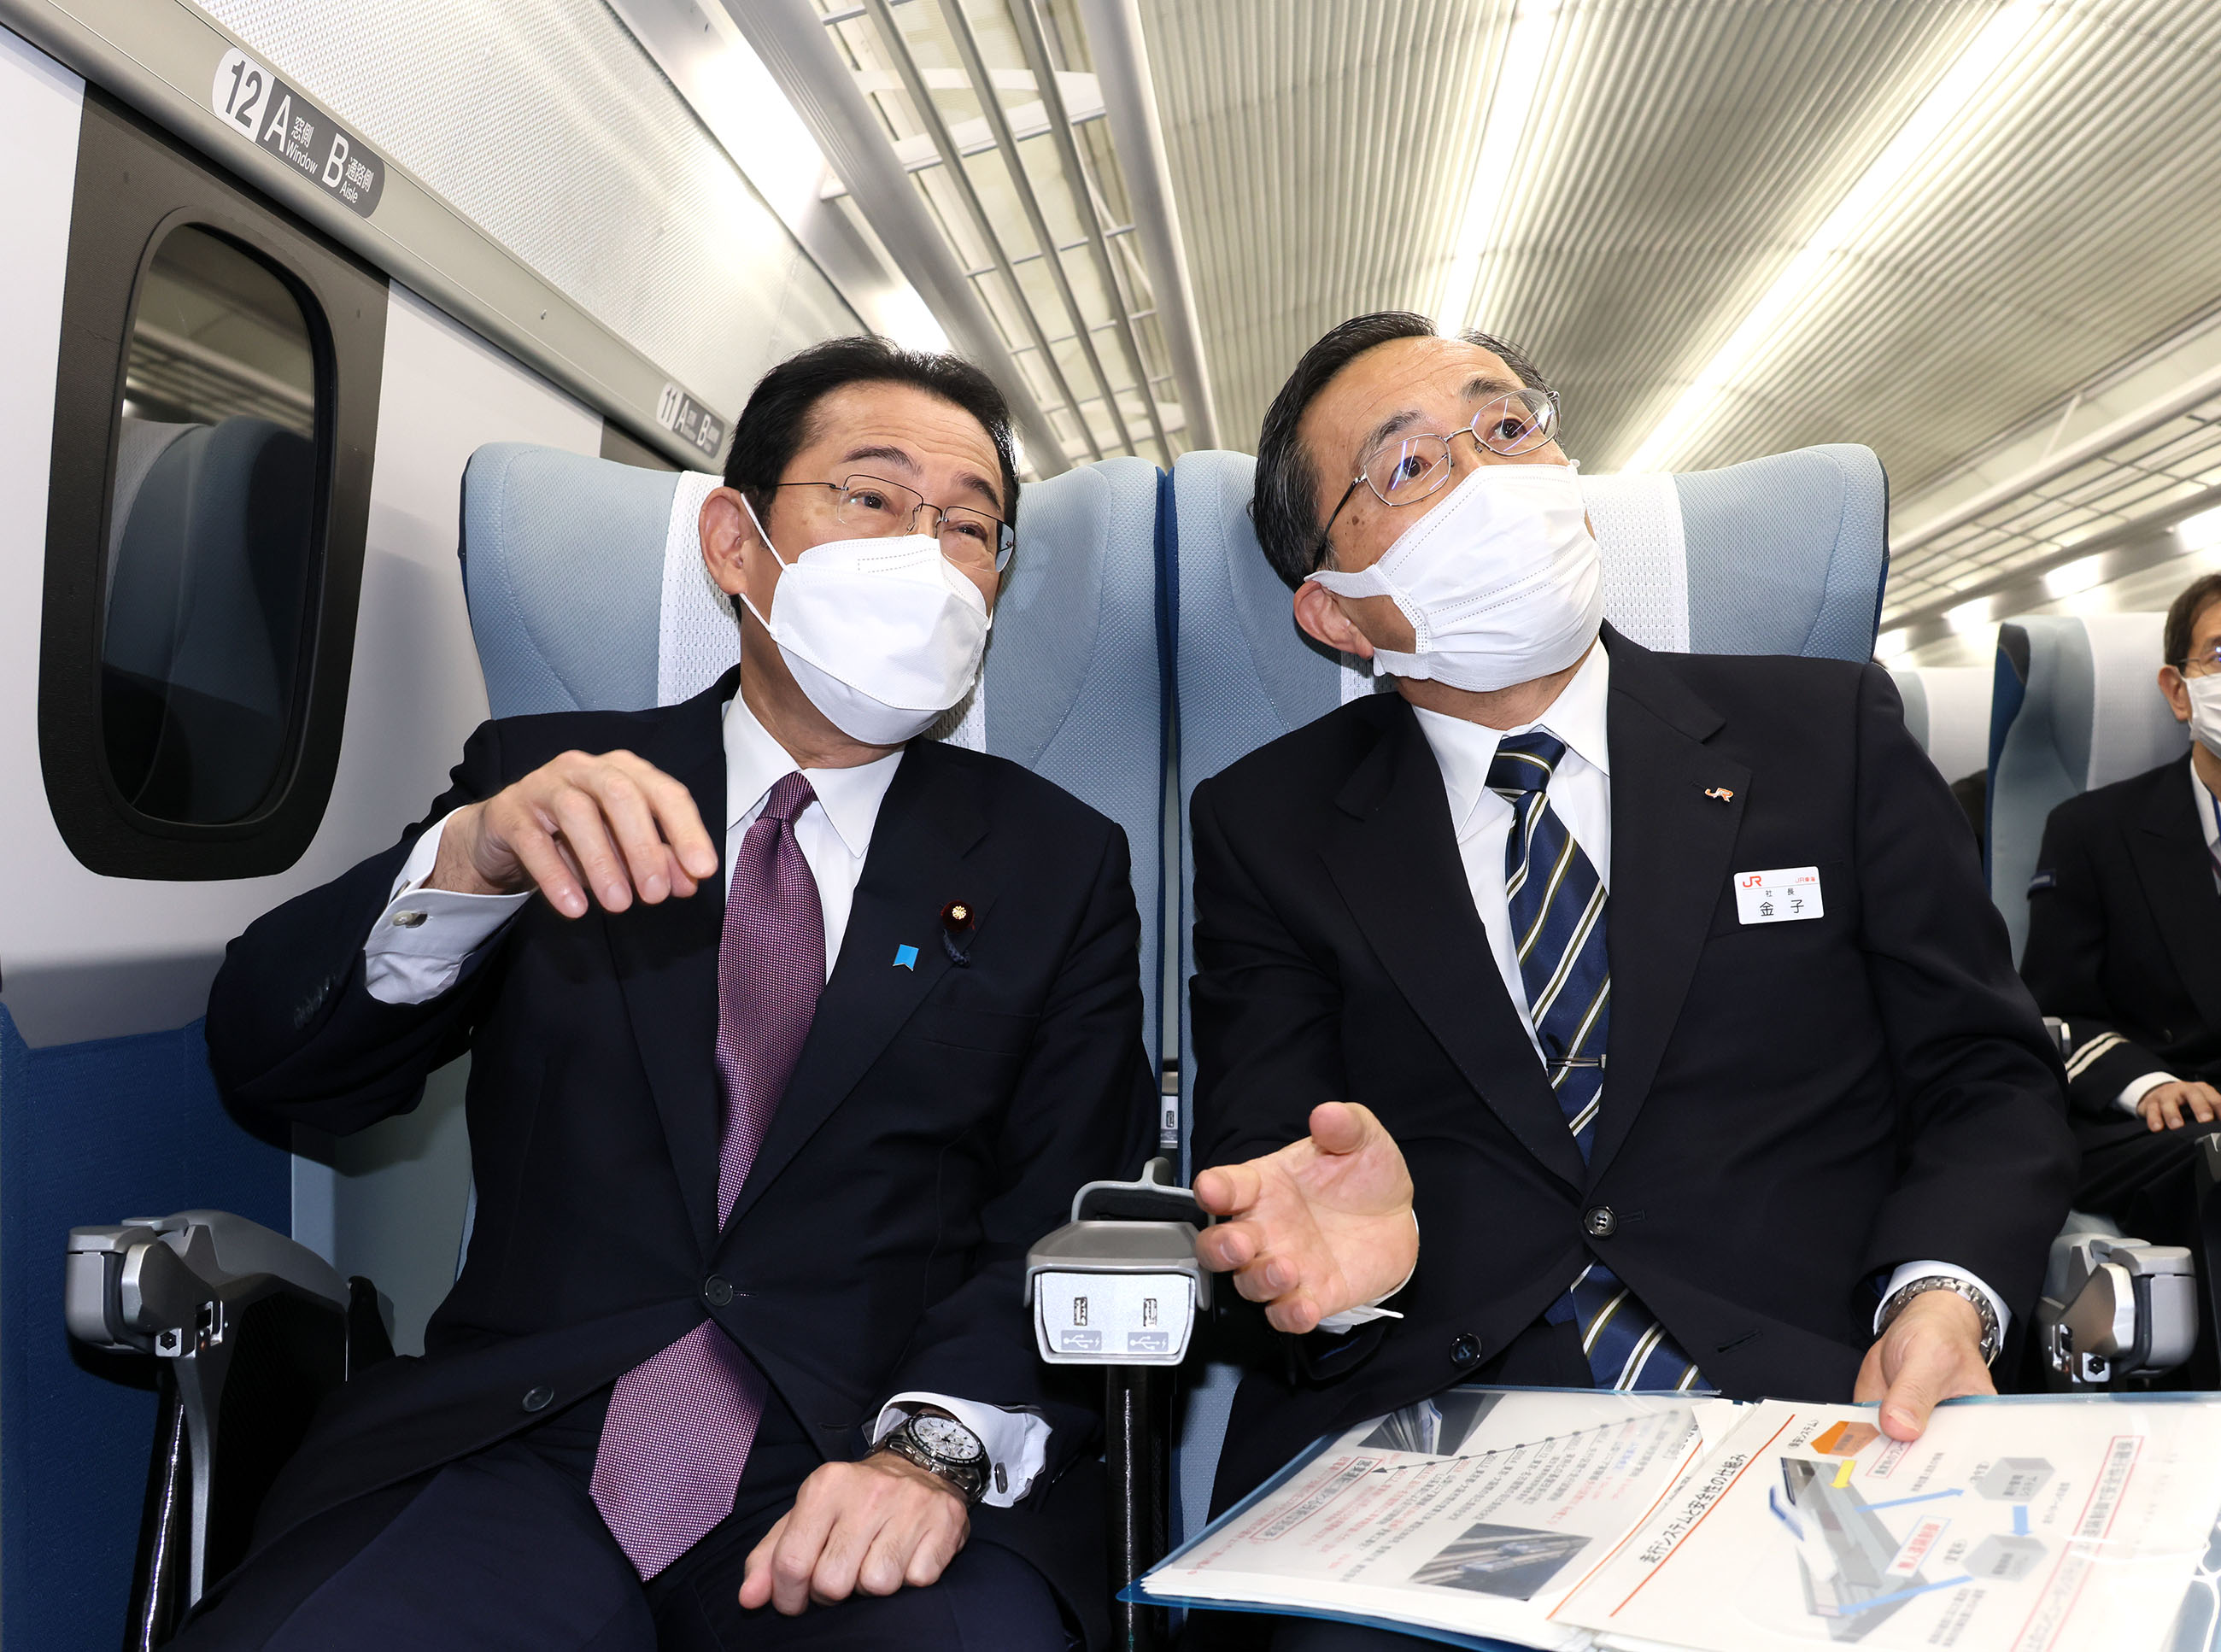 Photograph of the Prime Minister visiting the Yamanashi Maglev Test Track (3)